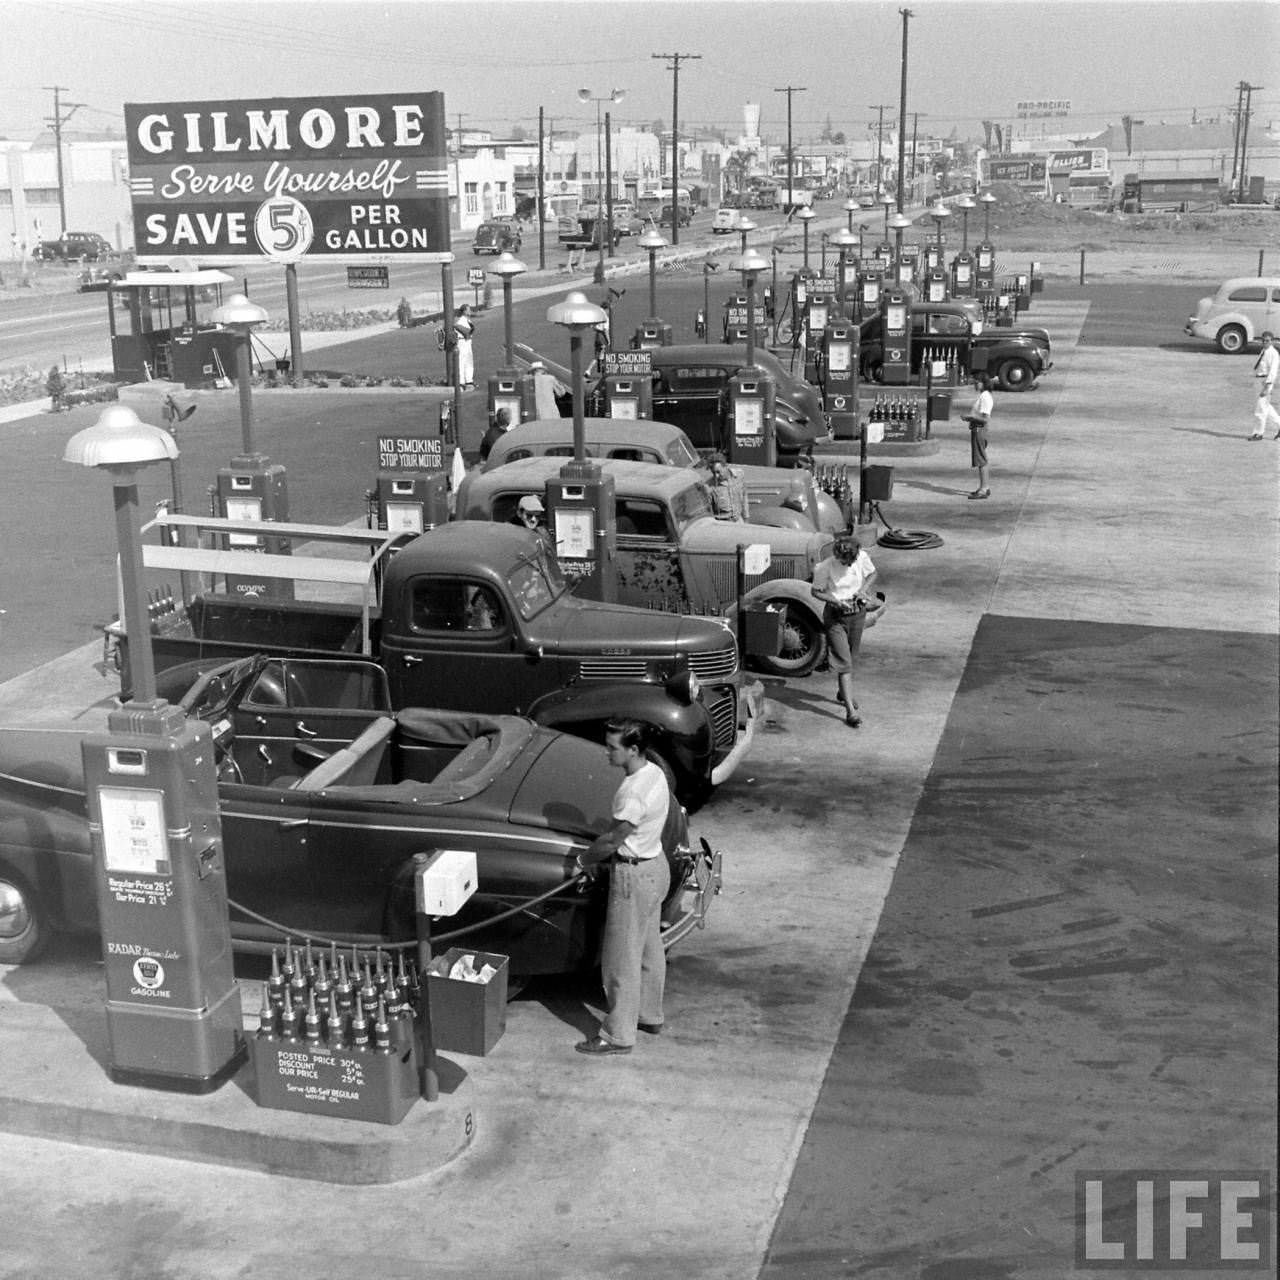 Gilmore Oil's Gas-A-Teria, an early self-serve station in Los Angeles, 1948.